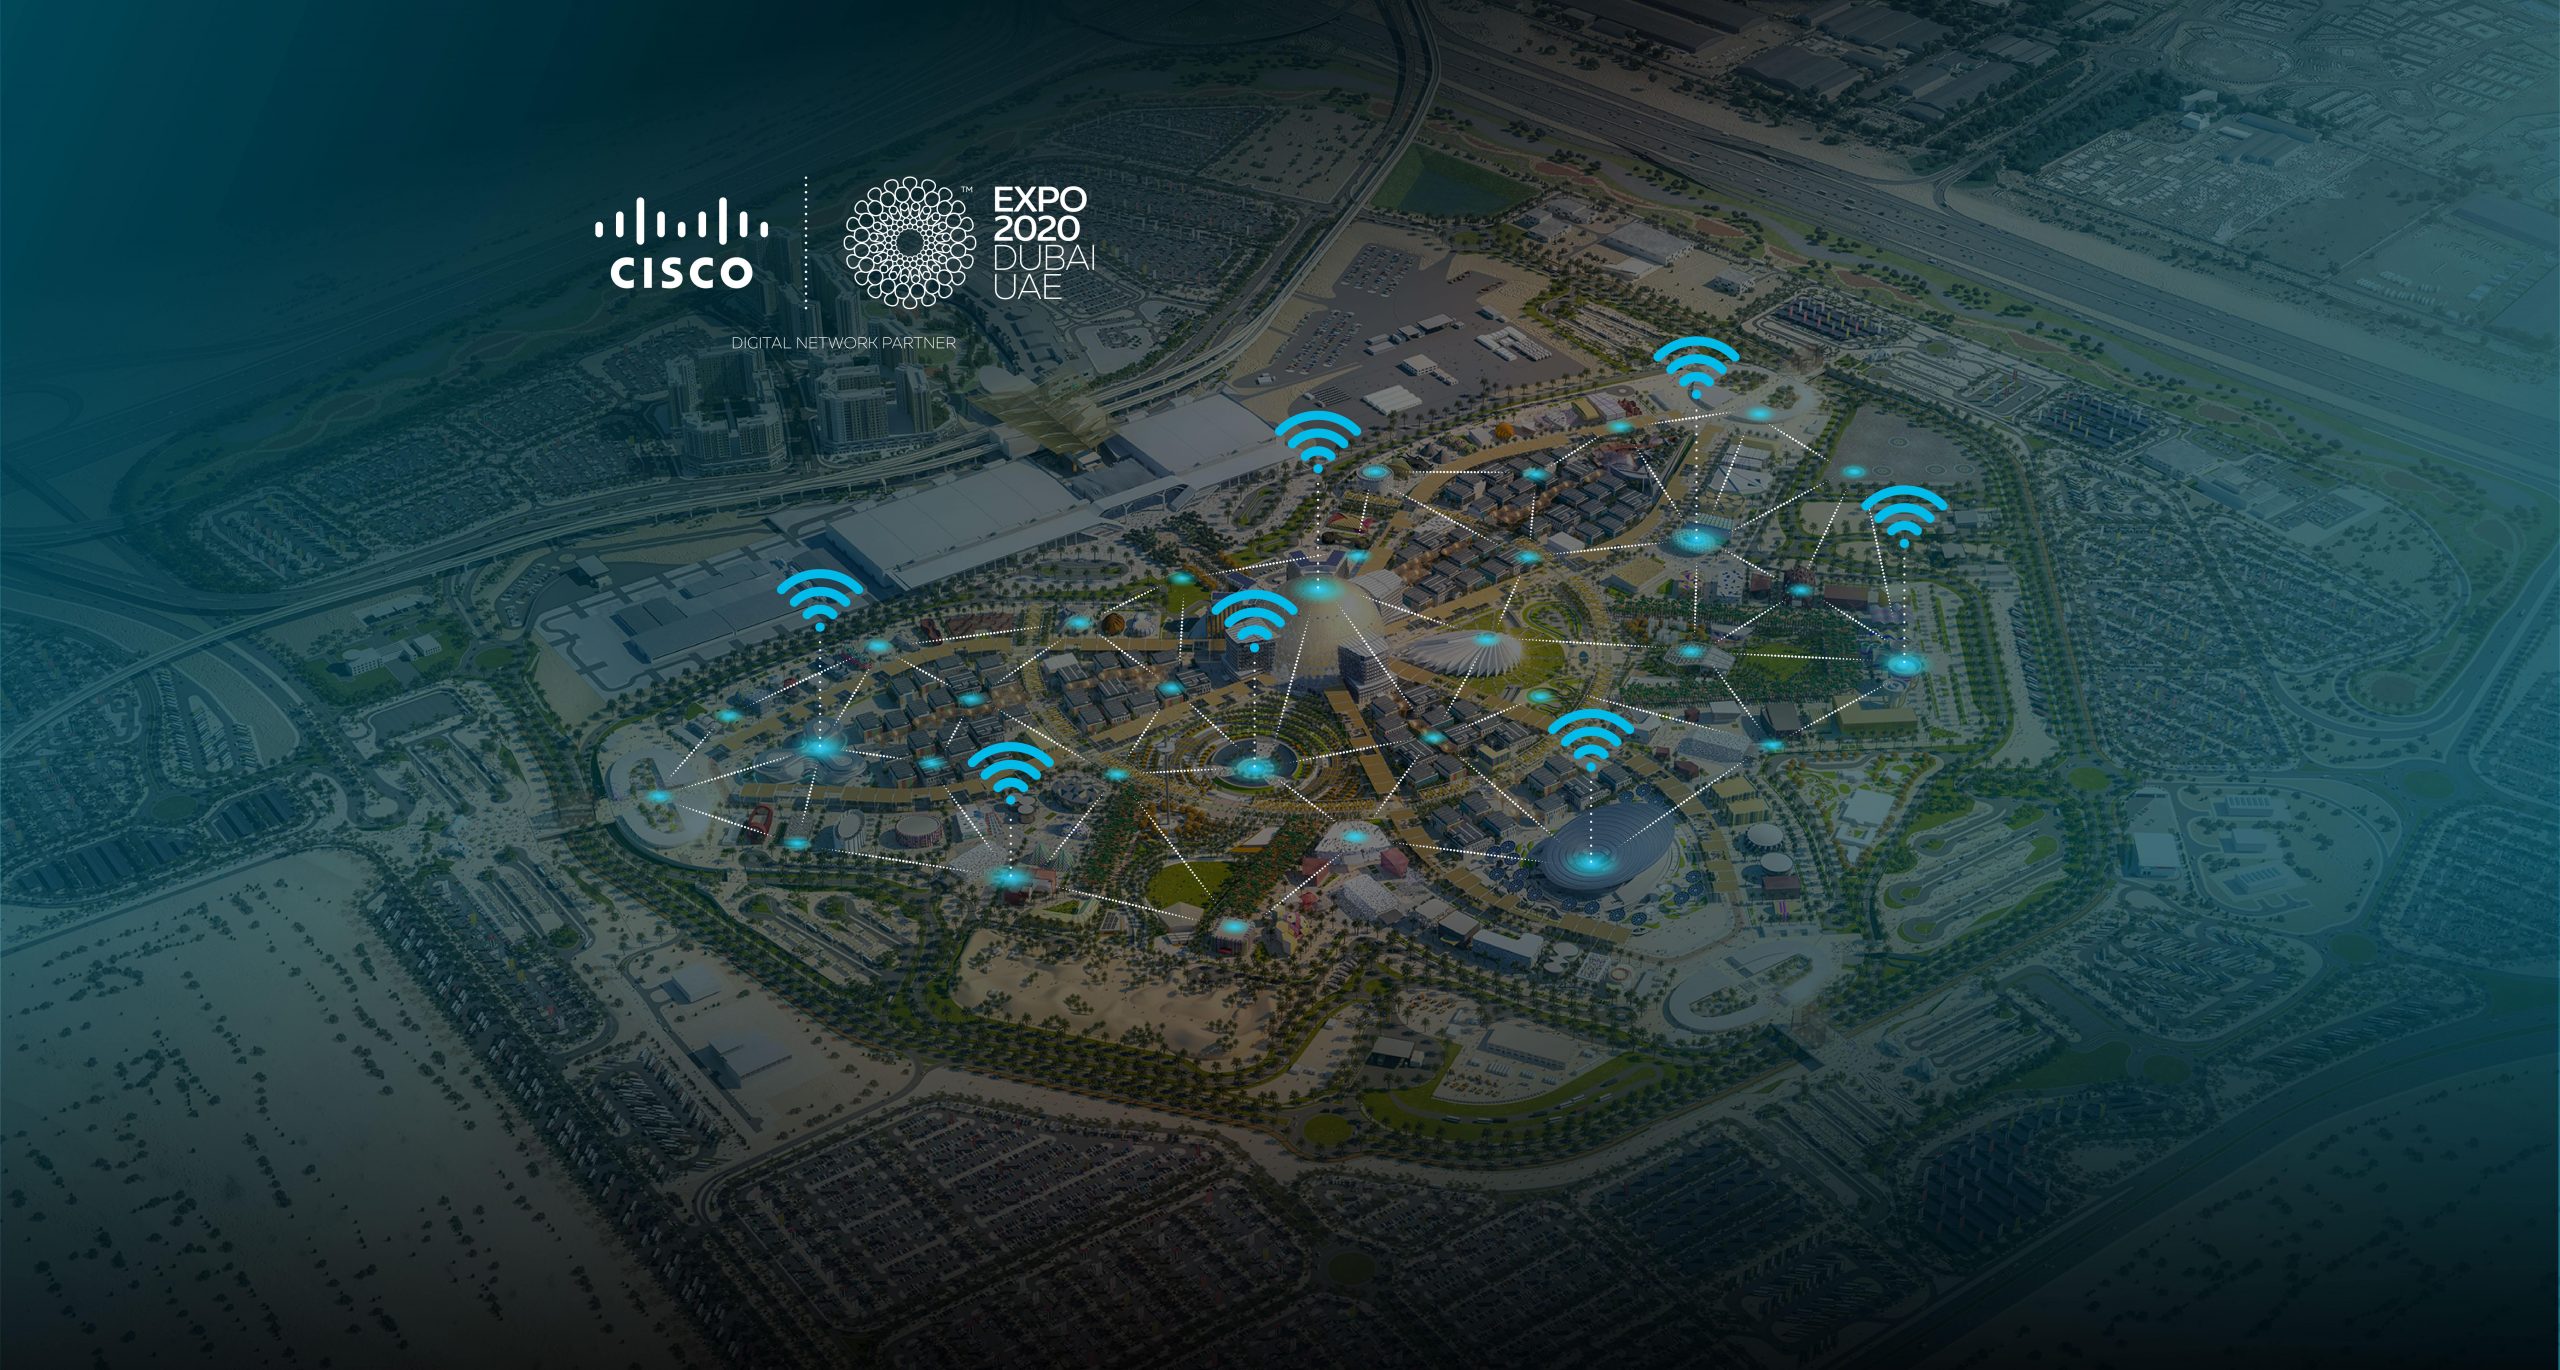 Cisco Wi-Fi Technology at the Expo 2020 Dubai Site (compressed)